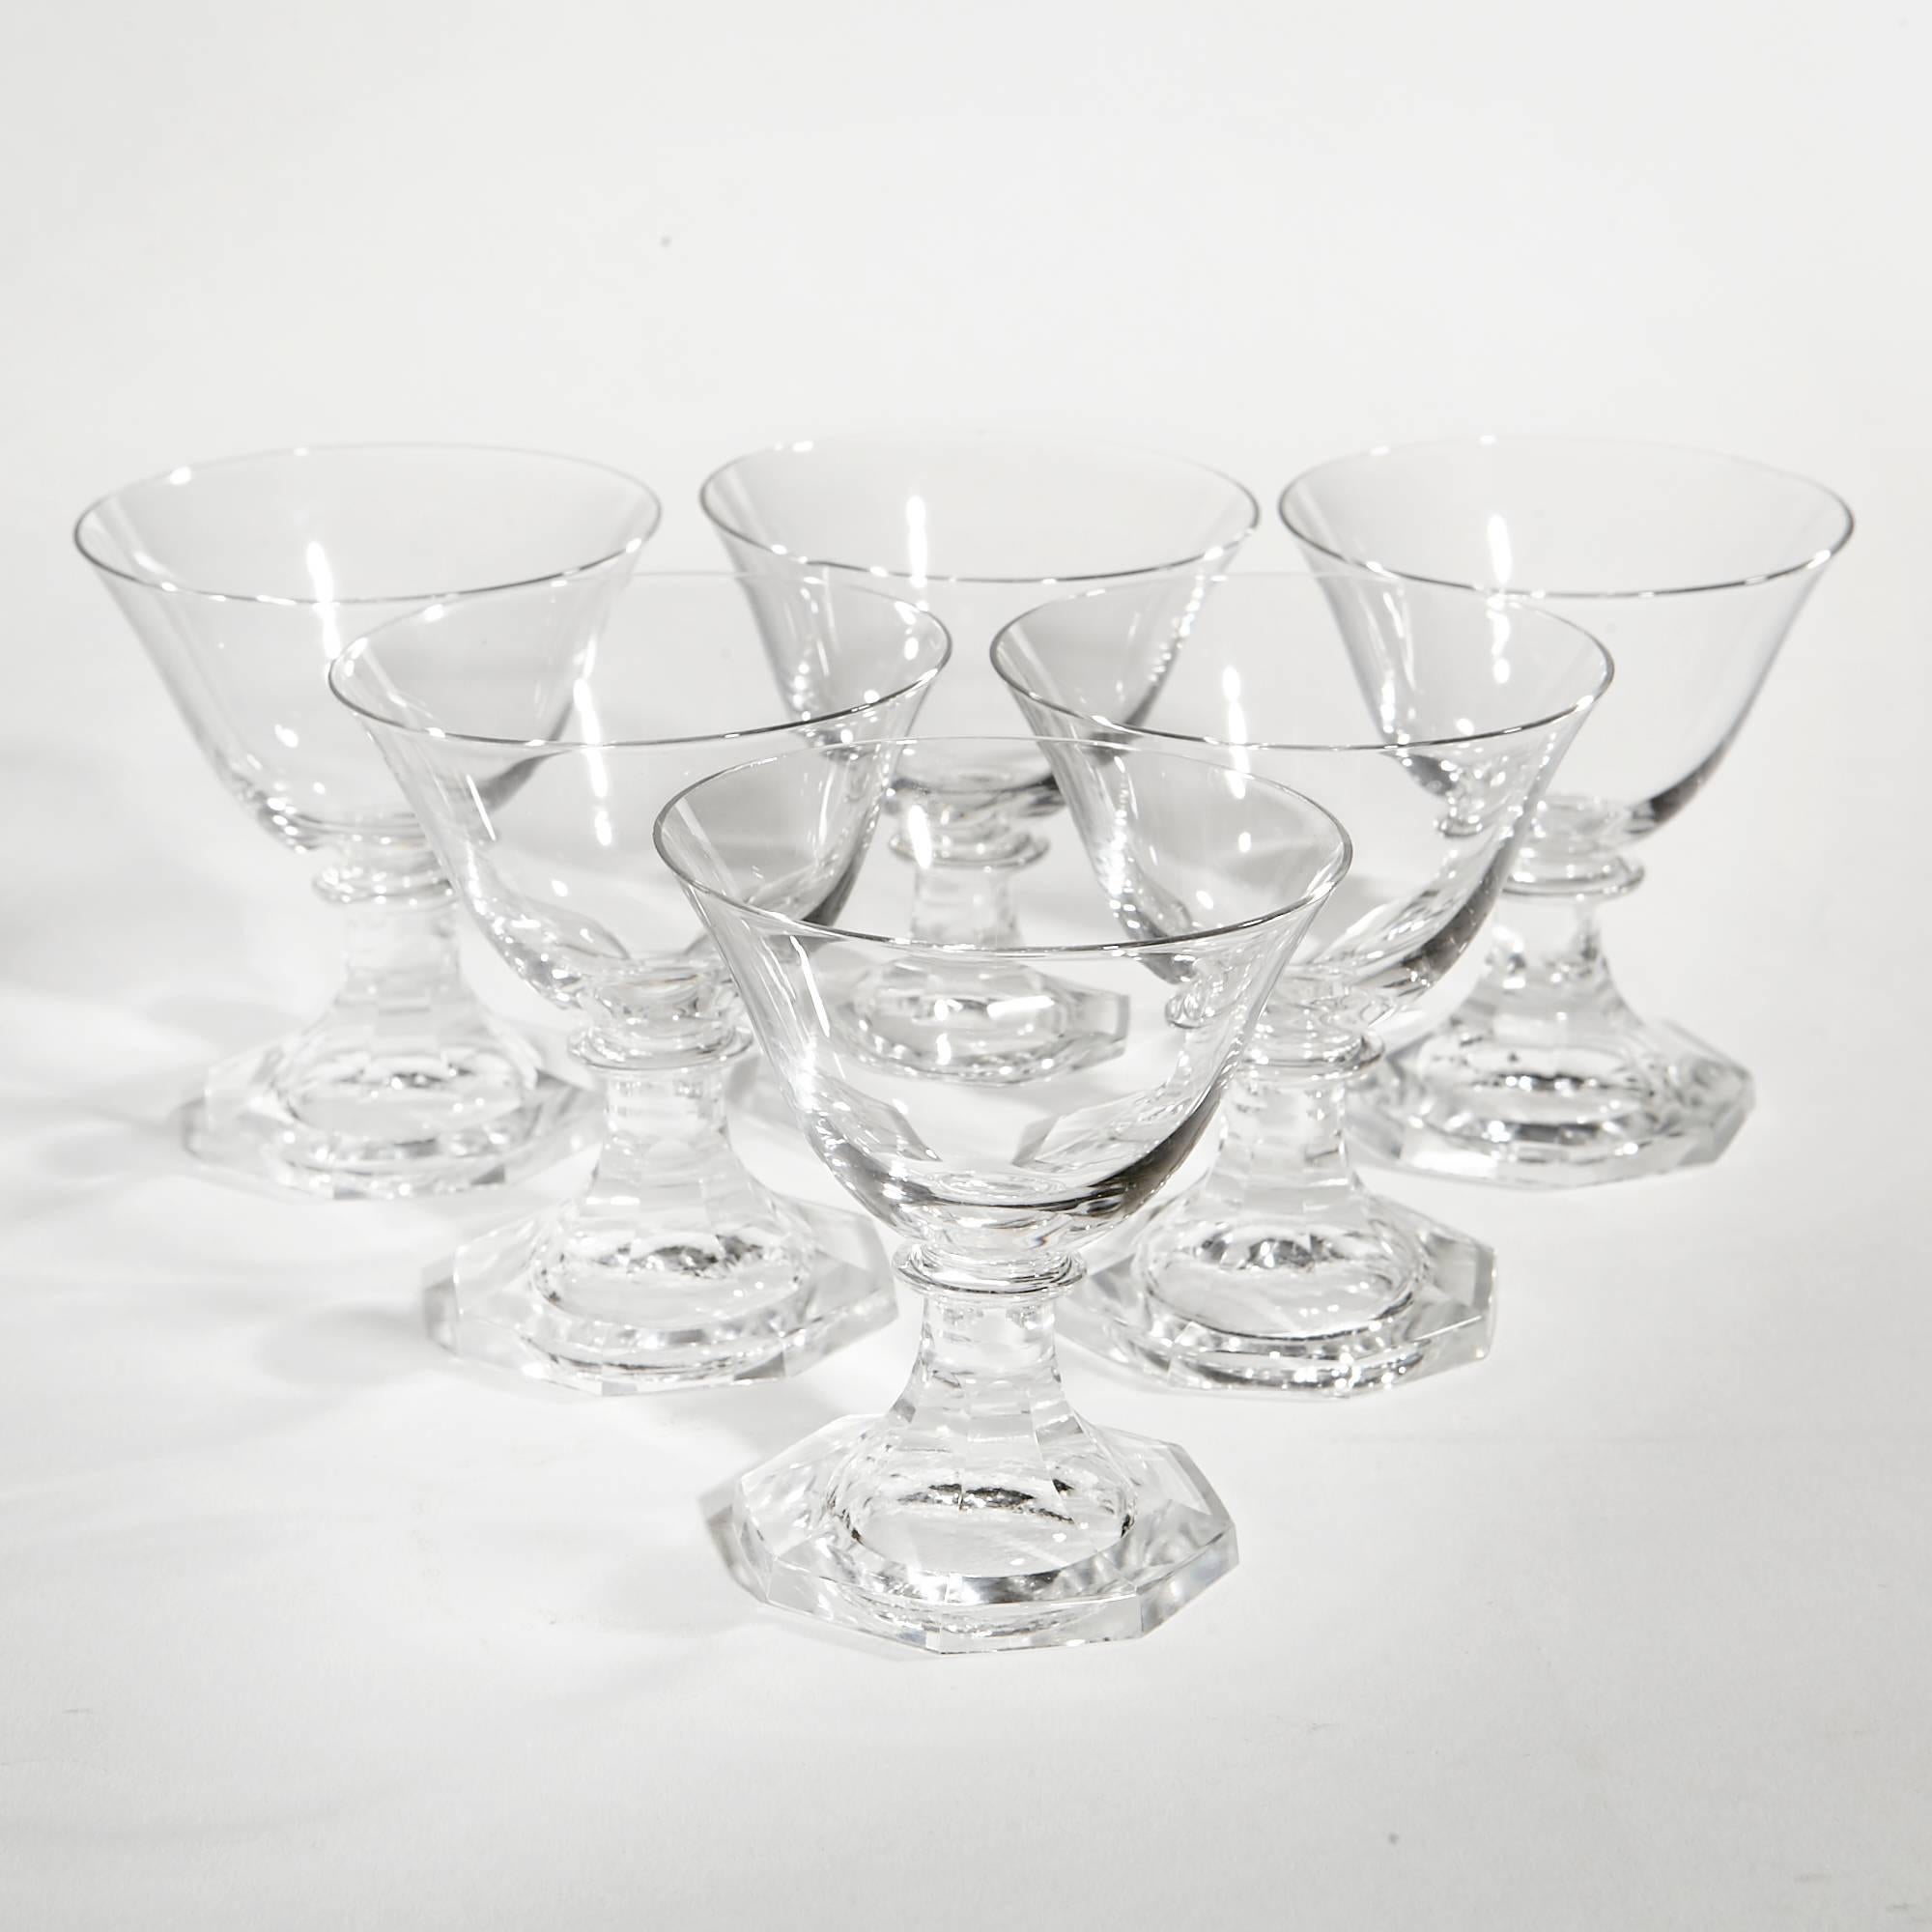 Orrefors Crystal Stems in the Seaford Pattern, 45 Pieces In Excellent Condition For Sale In Amherst, NH